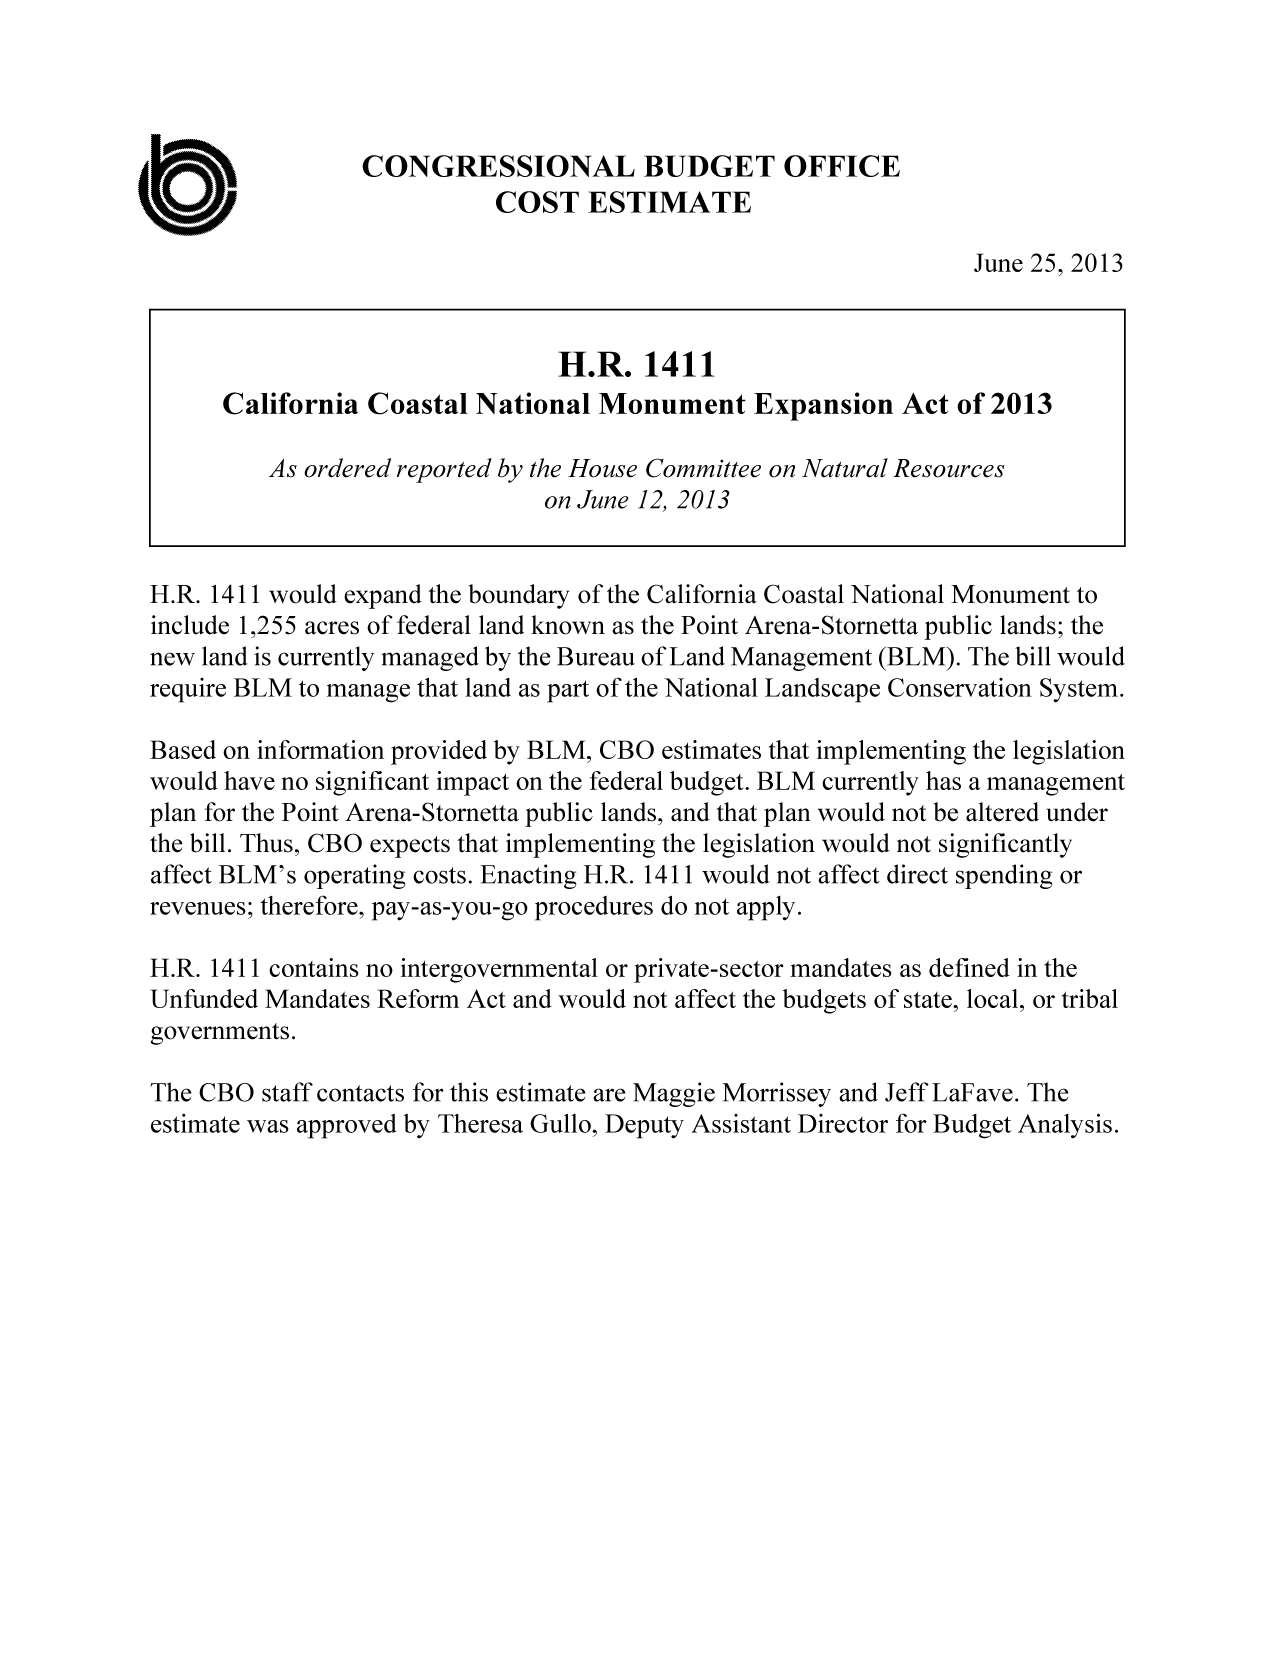 handle is hein.congrec/cbo11185 and id is 1 raw text is: CONGRESSIONAL BUDGET OFFICE
U.                       COST ESTIMATE
June 25, 2013
H.R. 1411
California Coastal National Monument Expansion Act of 2013
As ordered reported by the House Committee on Natural Resources
on June 12, 2013
H.R. 1411 would expand the boundary of the California Coastal National Monument to
include 1,255 acres of federal land known as the Point Arena-Stornetta public lands; the
new land is currently managed by the Bureau of Land Management (BLM). The bill would
require BLM to manage that land as part of the National Landscape Conservation System.
Based on information provided by BLM, CBO estimates that implementing the legislation
would have no significant impact on the federal budget. BLM currently has a management
plan for the Point Arena-Stornetta public lands, and that plan would not be altered under
the bill. Thus, CBO expects that implementing the legislation would not significantly
affect BLM's operating costs. Enacting H.R. 1411 would not affect direct spending or
revenues; therefore, pay-as-you-go procedures do not apply.
H.R. 1411 contains no intergovernmental or private-sector mandates as defined in the
Unfunded Mandates Reform Act and would not affect the budgets of state, local, or tribal
governments.
The CBO staff contacts for this estimate are Maggie Morrissey and Jeff LaFave. The
estimate was approved by Theresa Gullo, Deputy Assistant Director for Budget Analysis.


